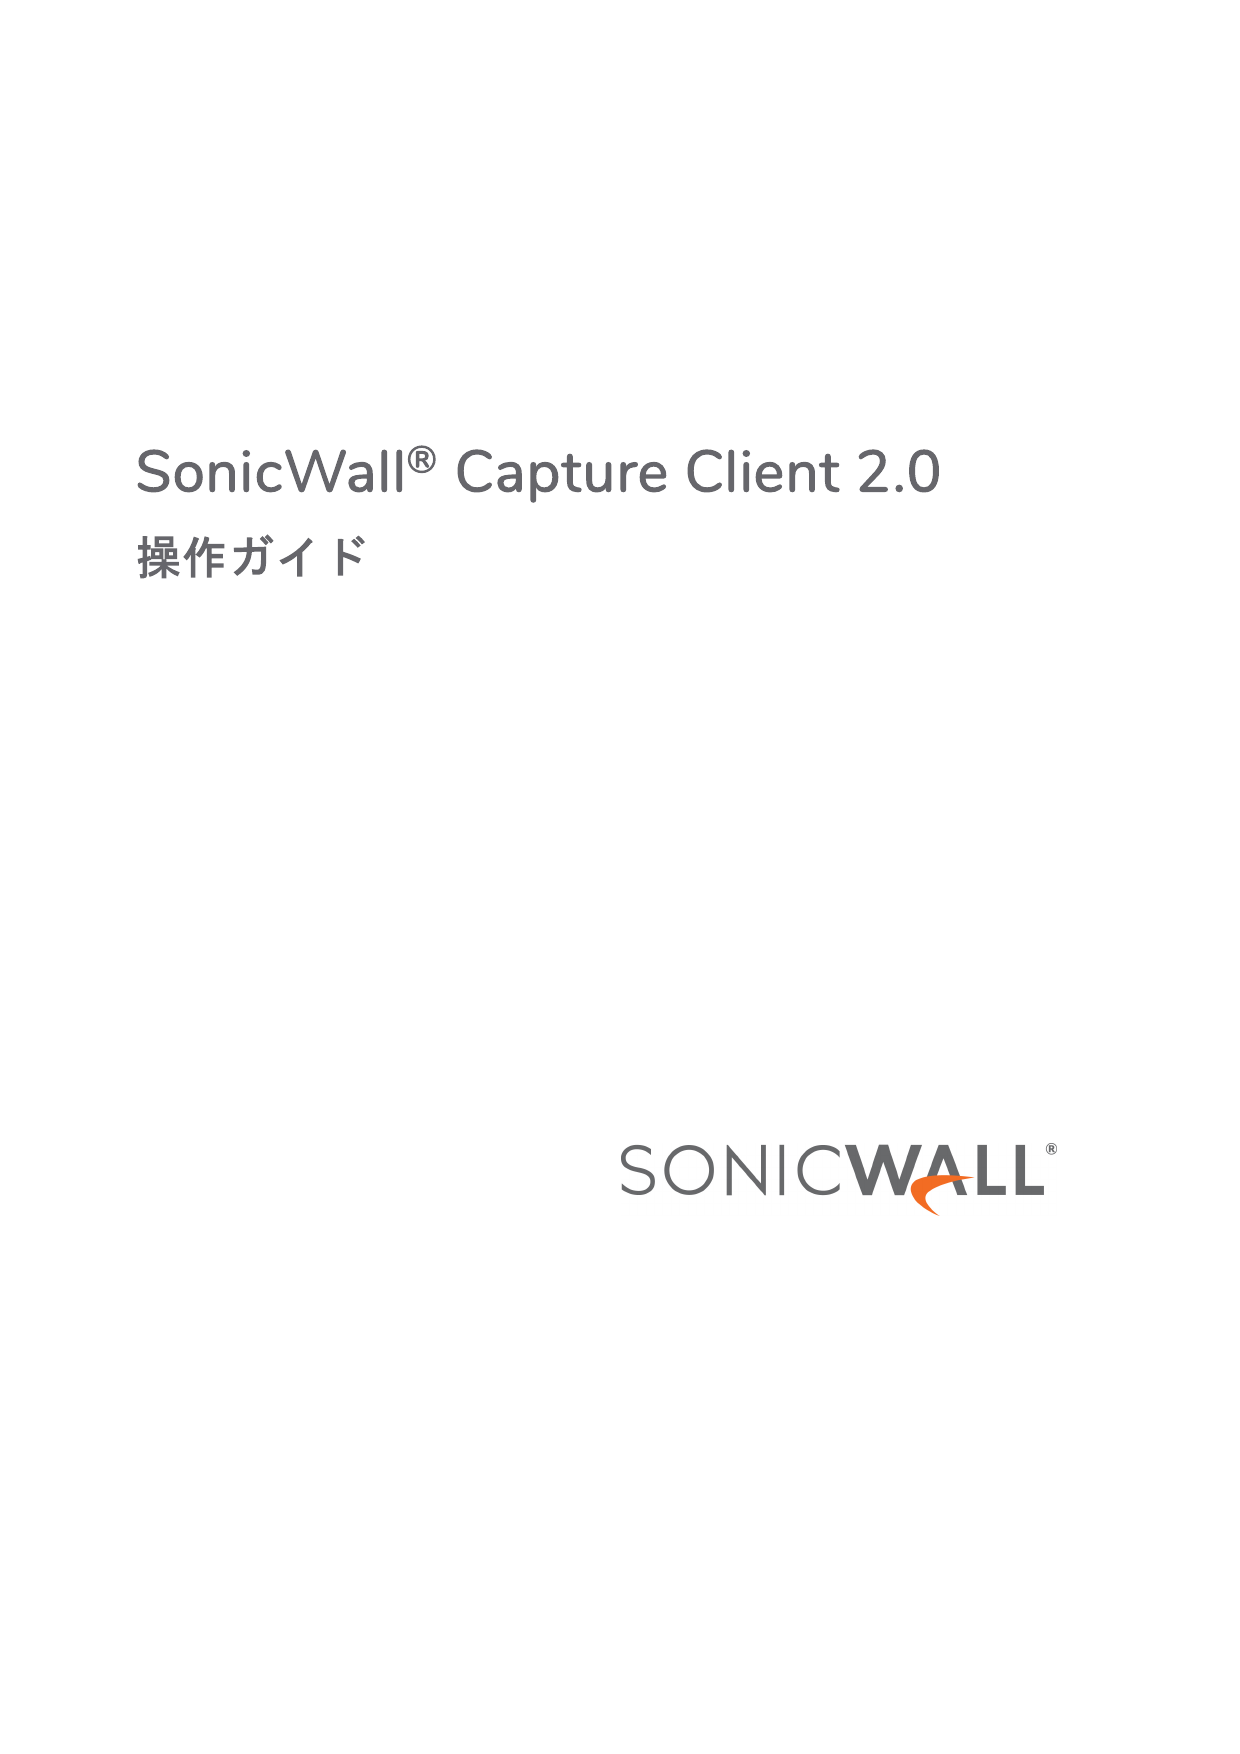 sonicwall capture client